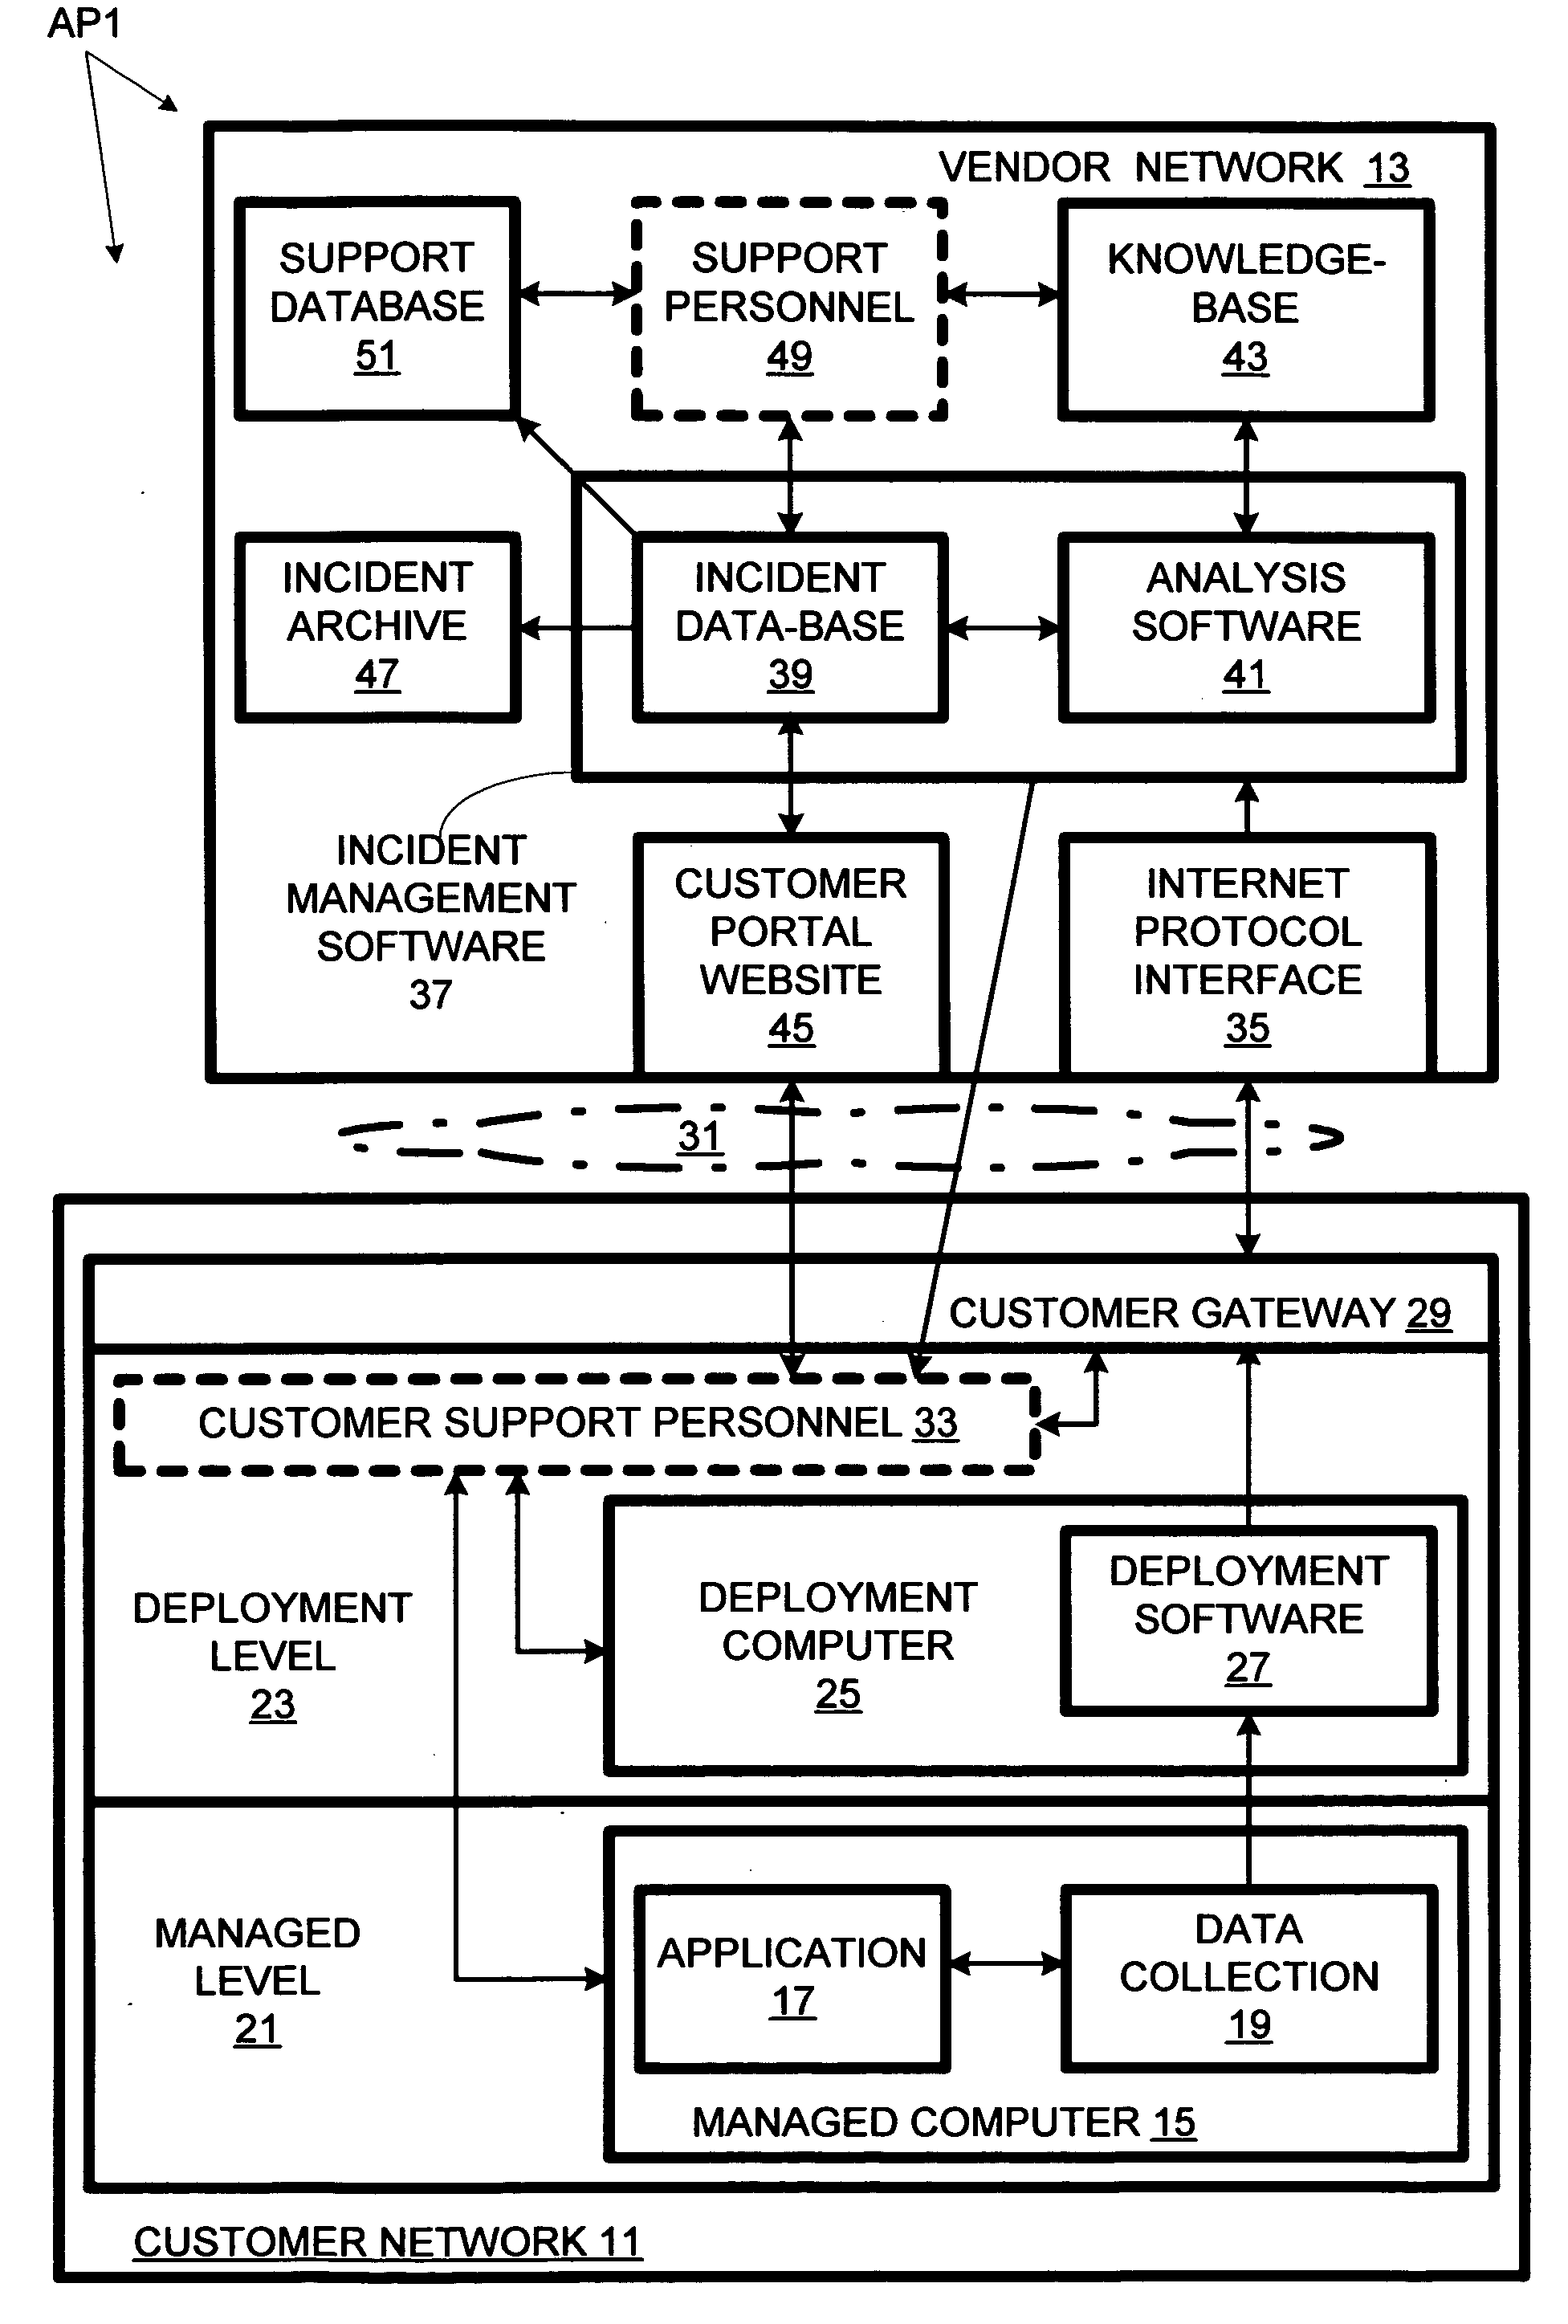 Computer support network with customer portal to monitor incident-handling status by vendor's computer service system